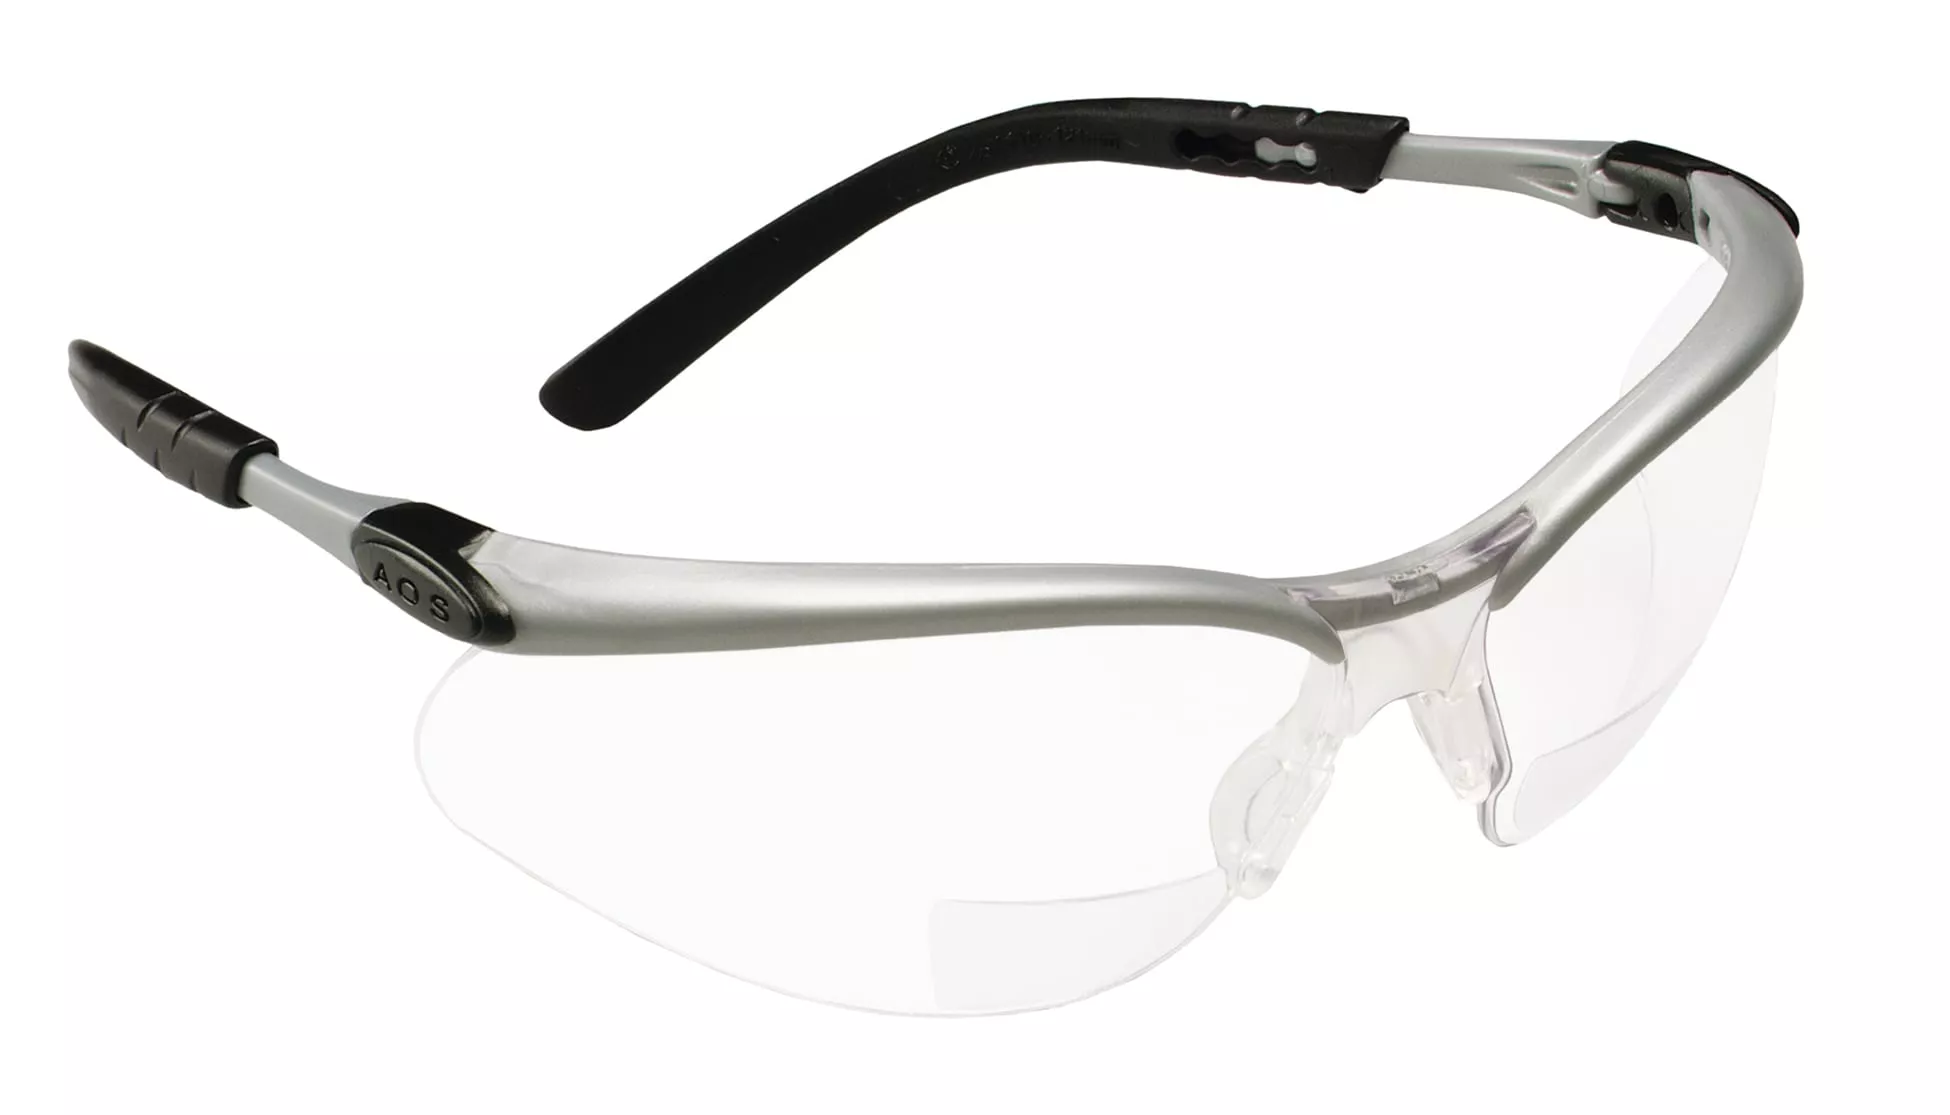 3M™ BX™ Reader Protective Eyewear 11375-00000-20, Clear Lens, Silver
Frame, +2.0 Diopter, 20 ea/Case